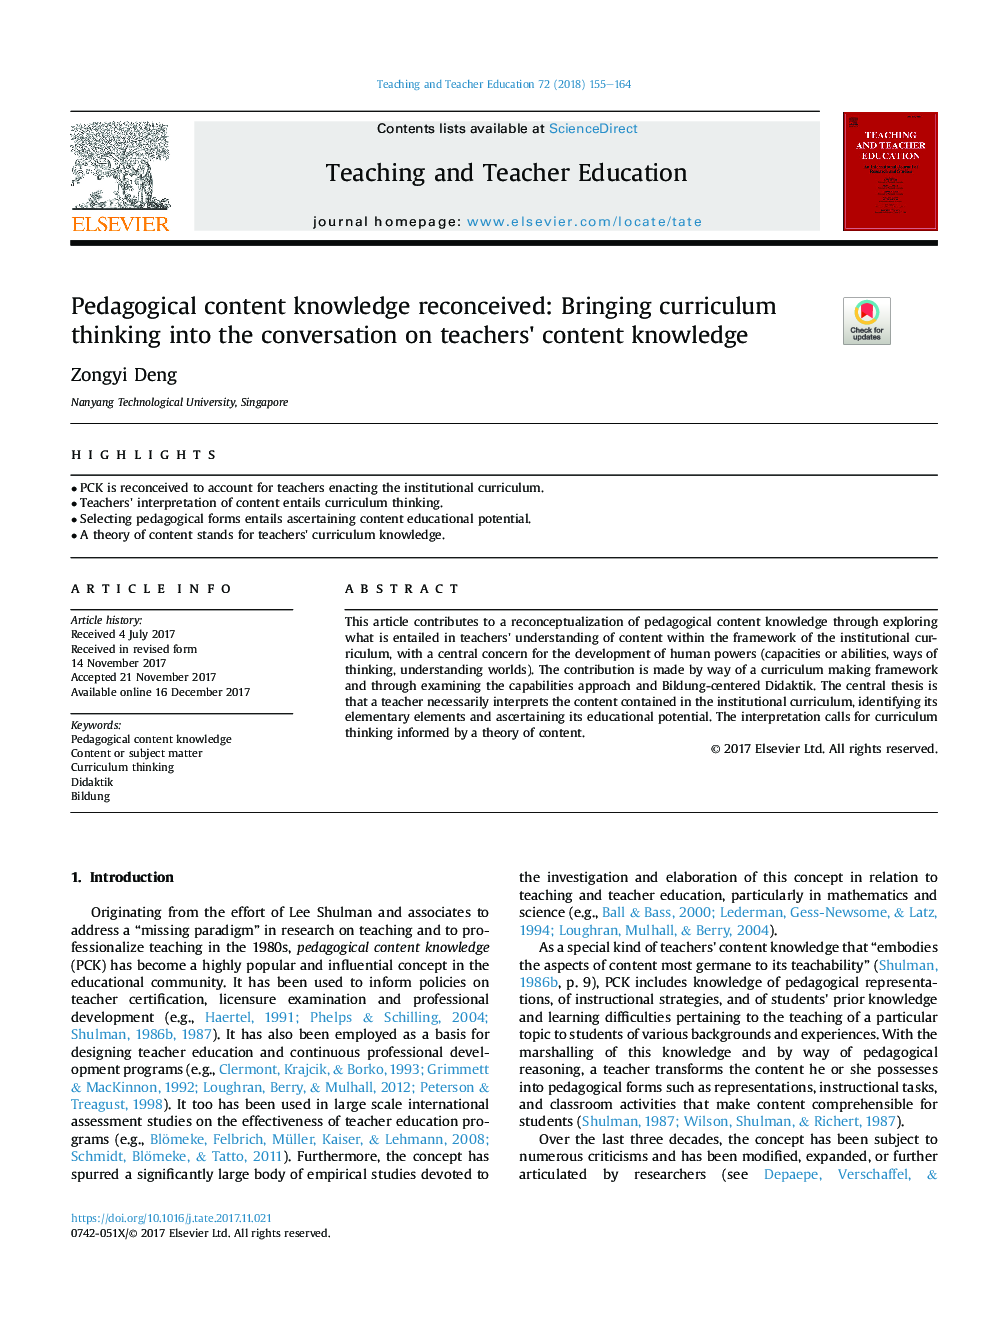 Pedagogical content knowledge reconceived: Bringing curriculum thinking into the conversation on teachers' content knowledge